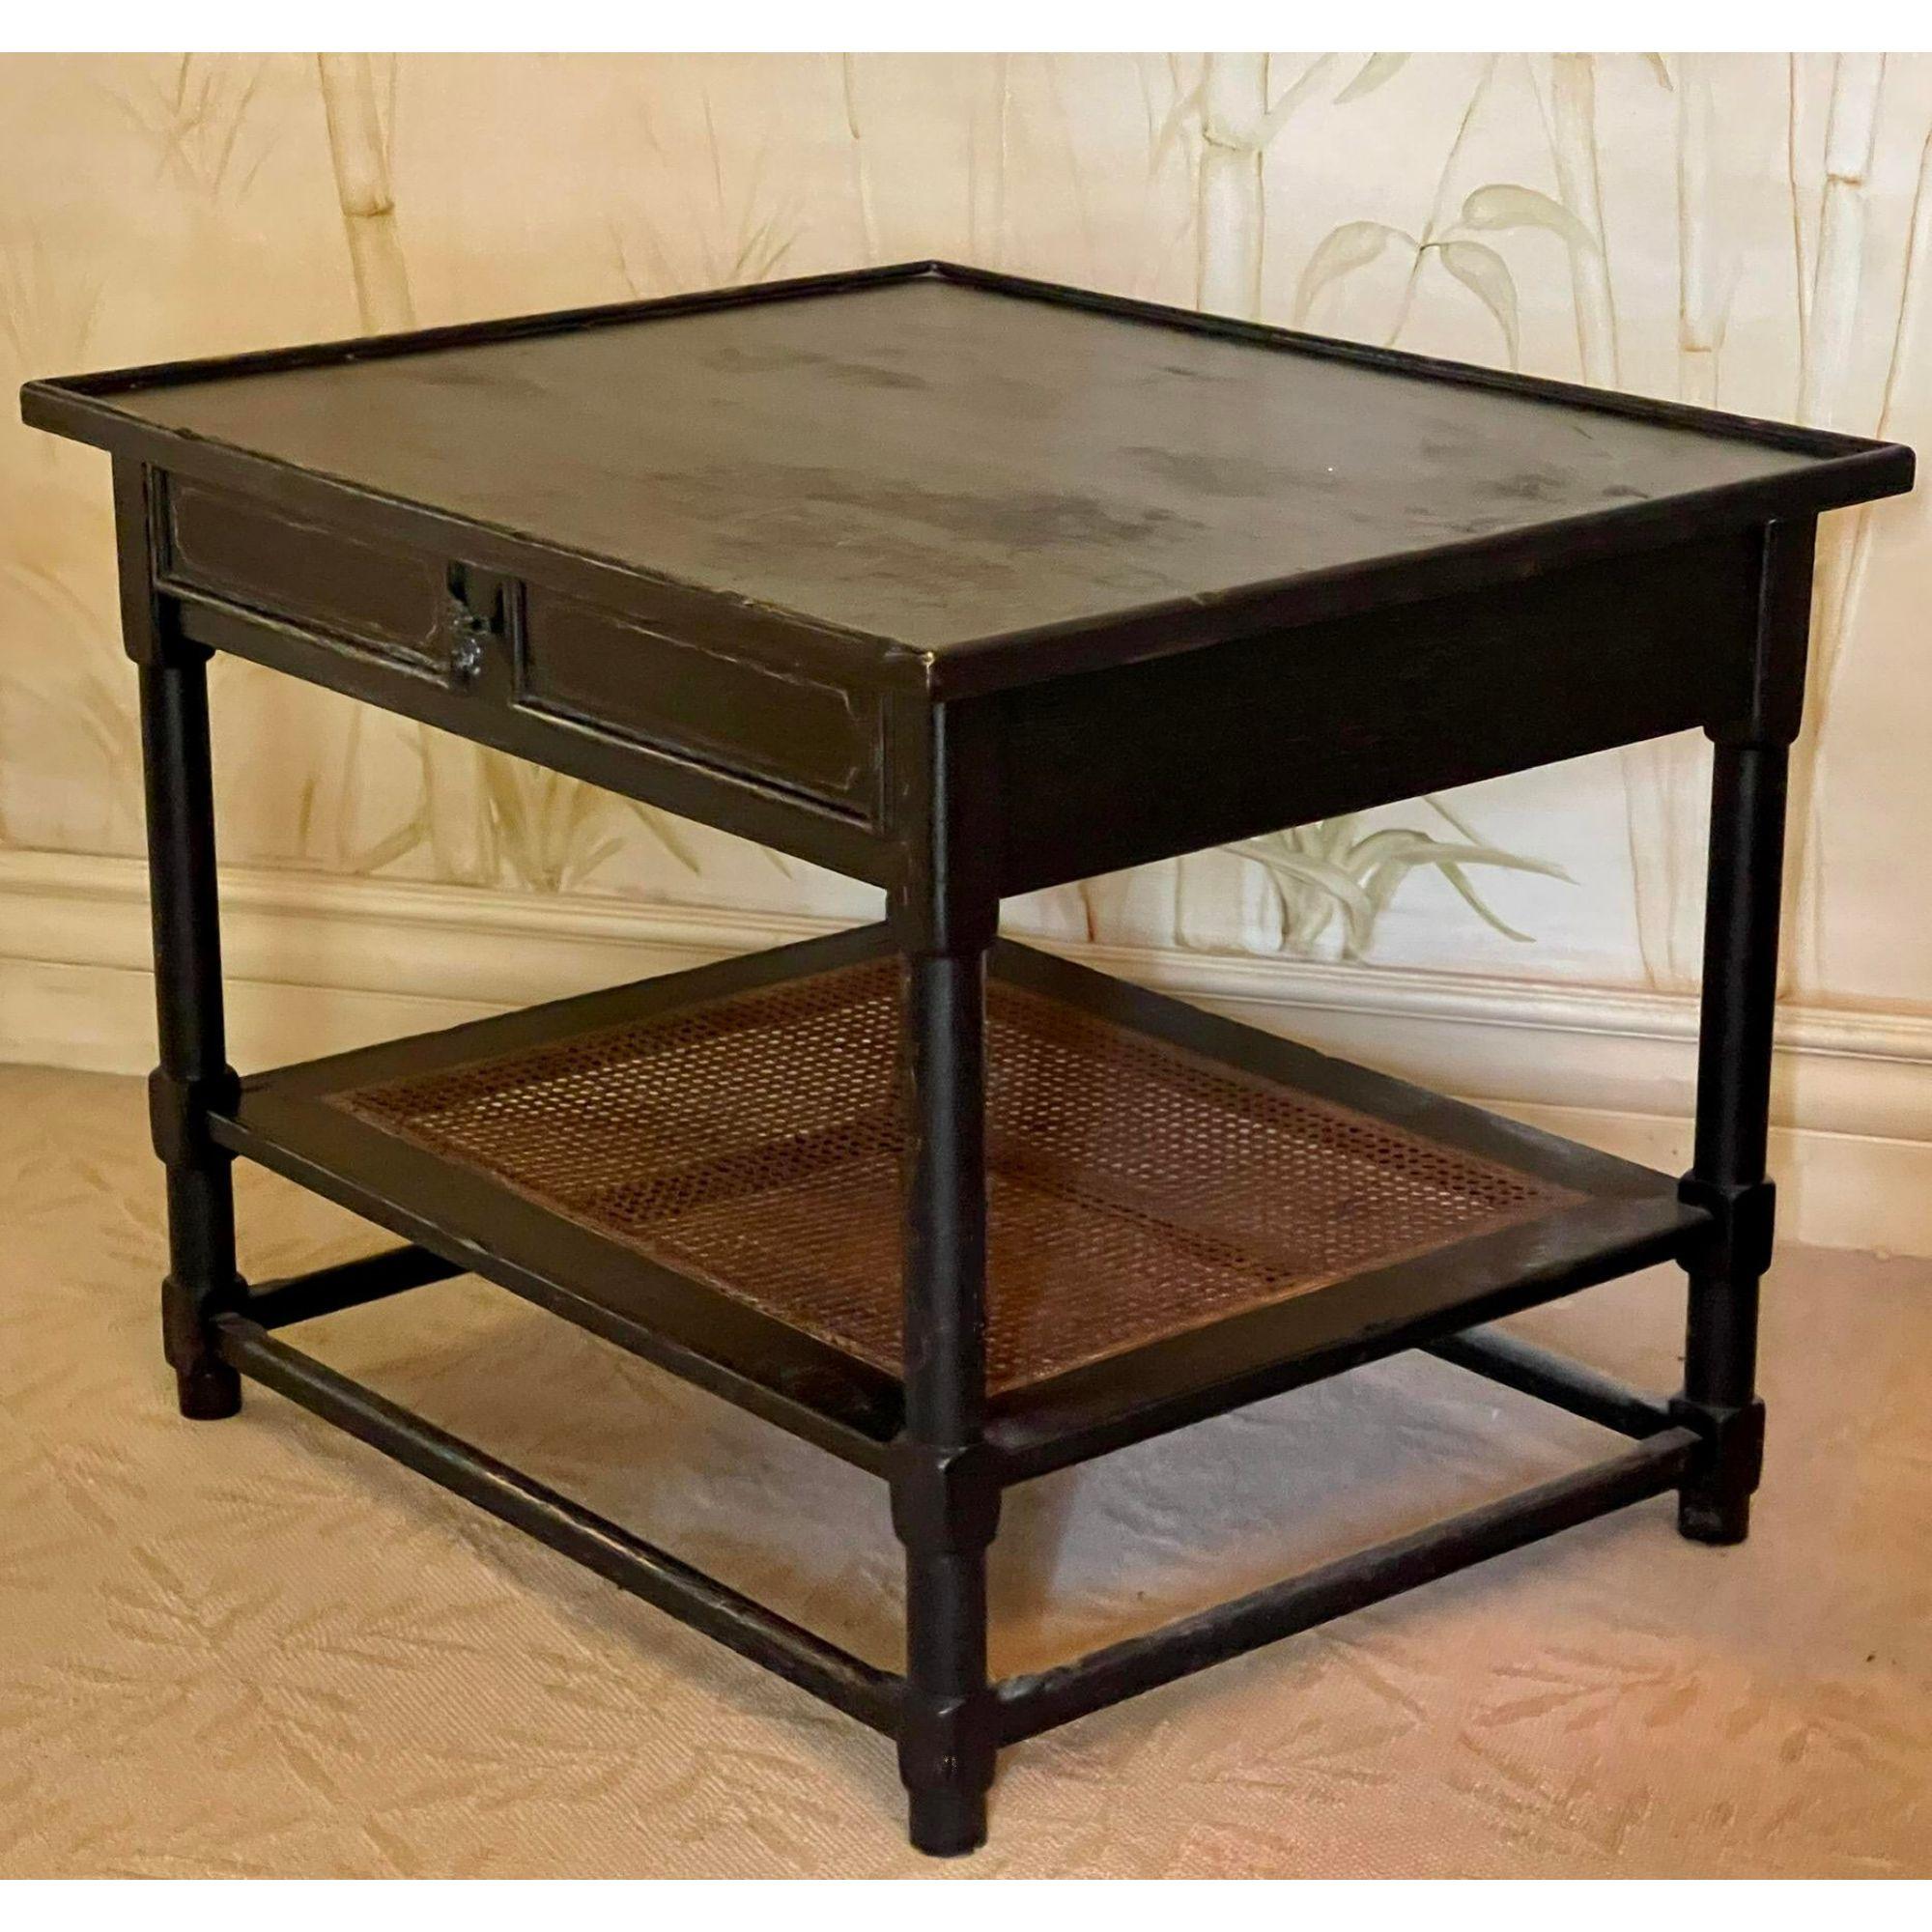 19th C style Charles Pollock black & gold chinoiserie side table. It features a rustic black painted finish with gilt details and a cane bottom shelf

Additional information: 
Materials: Gold
Color: Black
Brand: William Switzer
Designer: